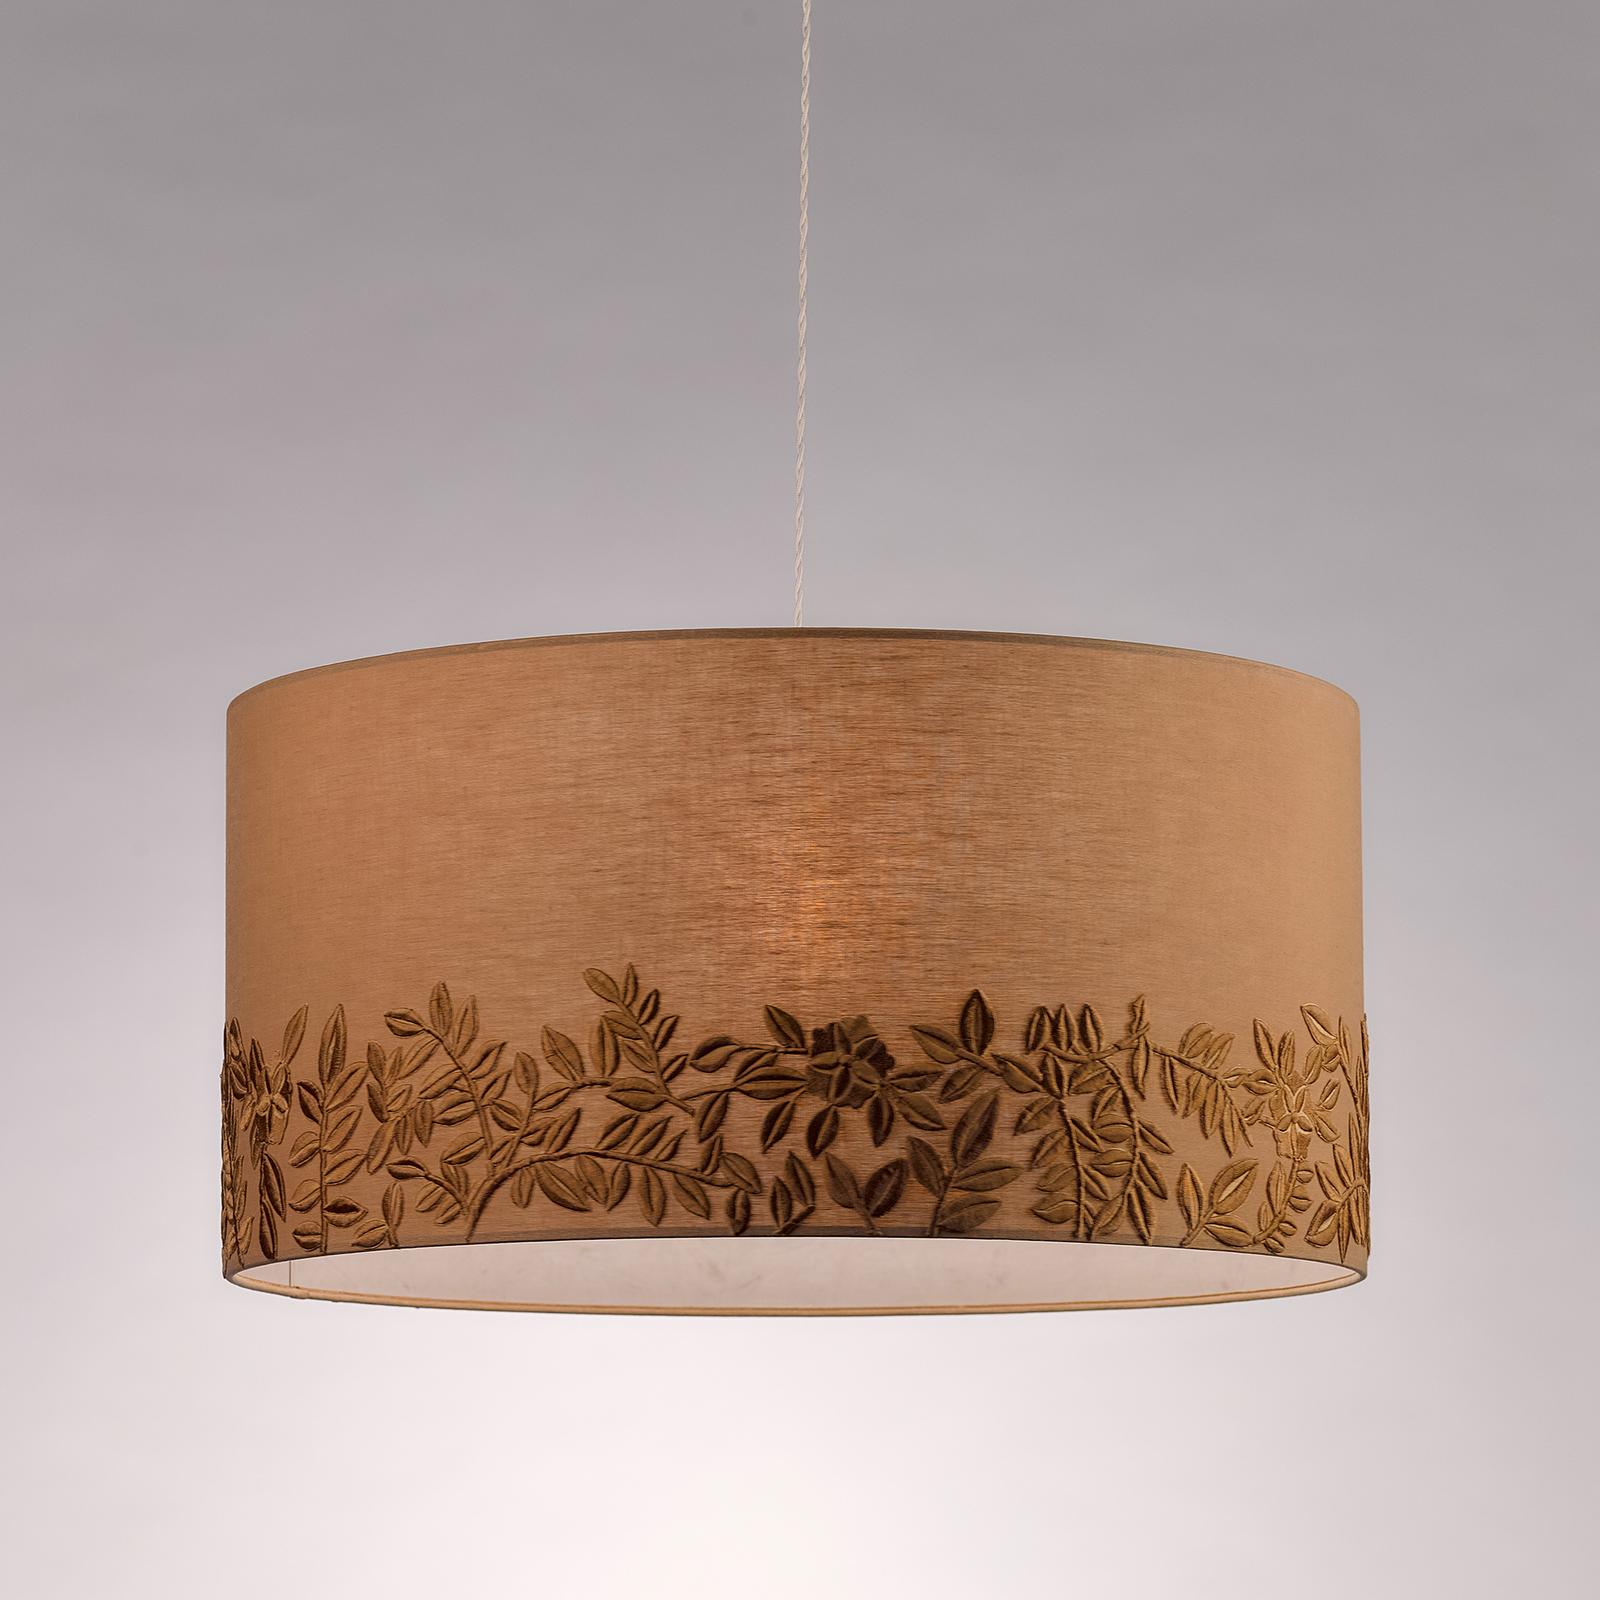 Elegant and timeless, this shade will fit both a ceiling and a floor lamp to infuse any room in the house with retro-chic charm. Its cylindrical shape is crafted of linen in a stone wash golden-sand color that is warm and welcoming. The bottom of